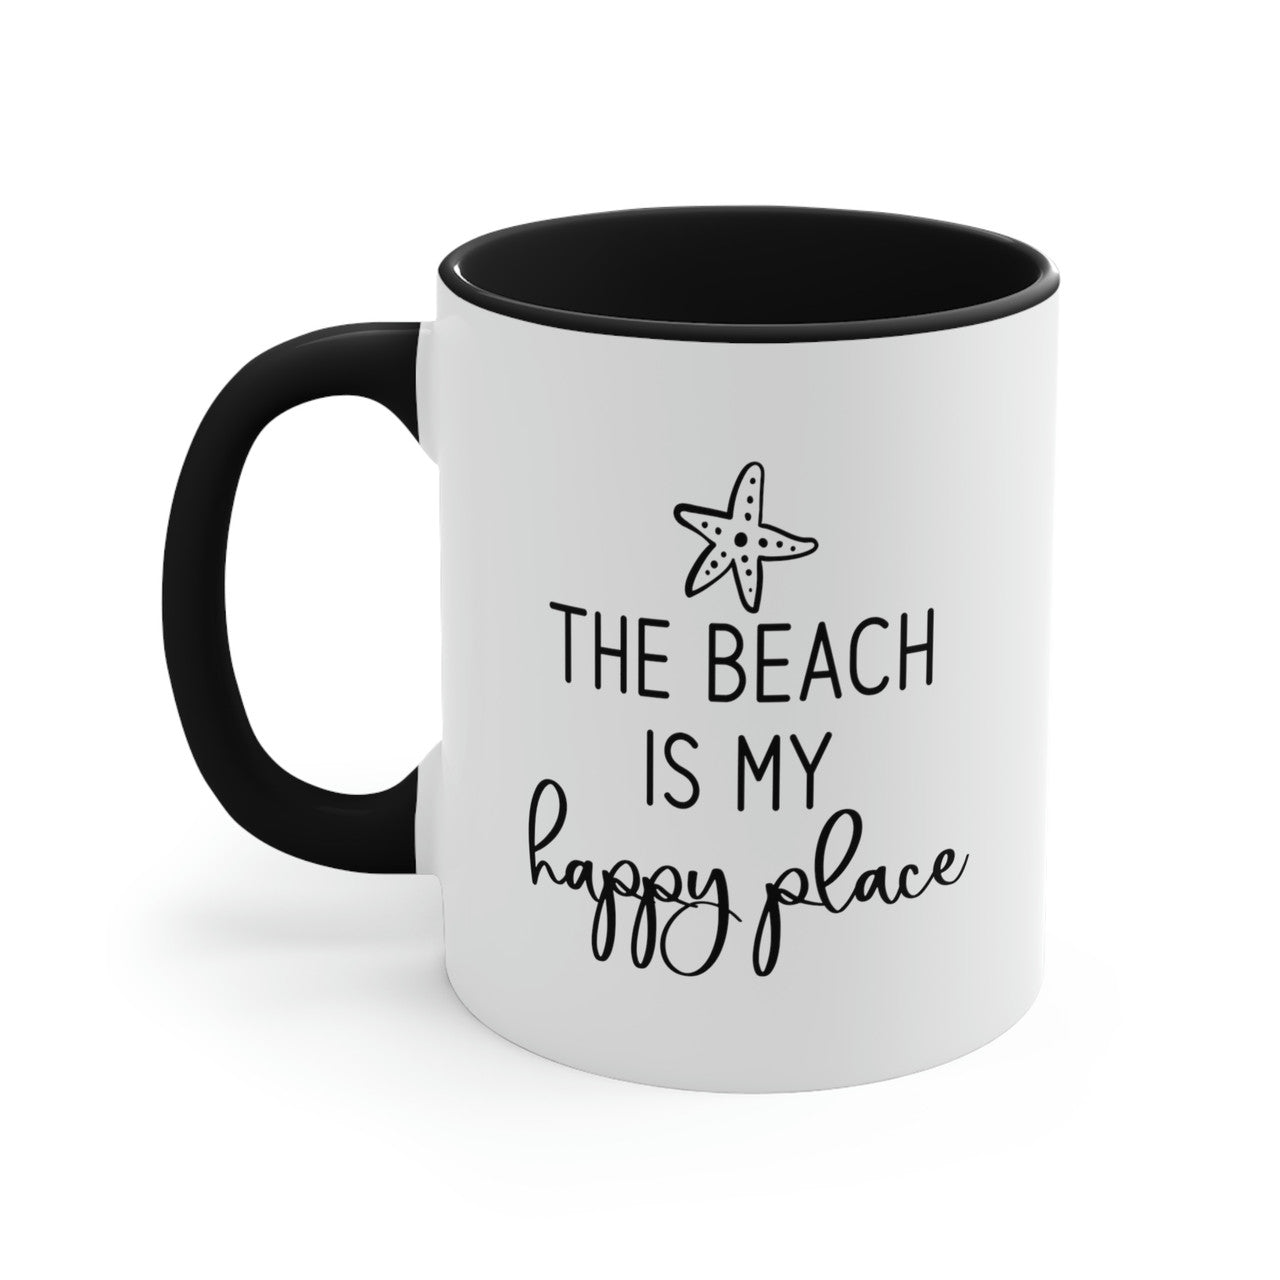 The Beach Is My Happy Place Ceramic Coffee Mug, 5 Colors Mugs New England Trading Co Black  